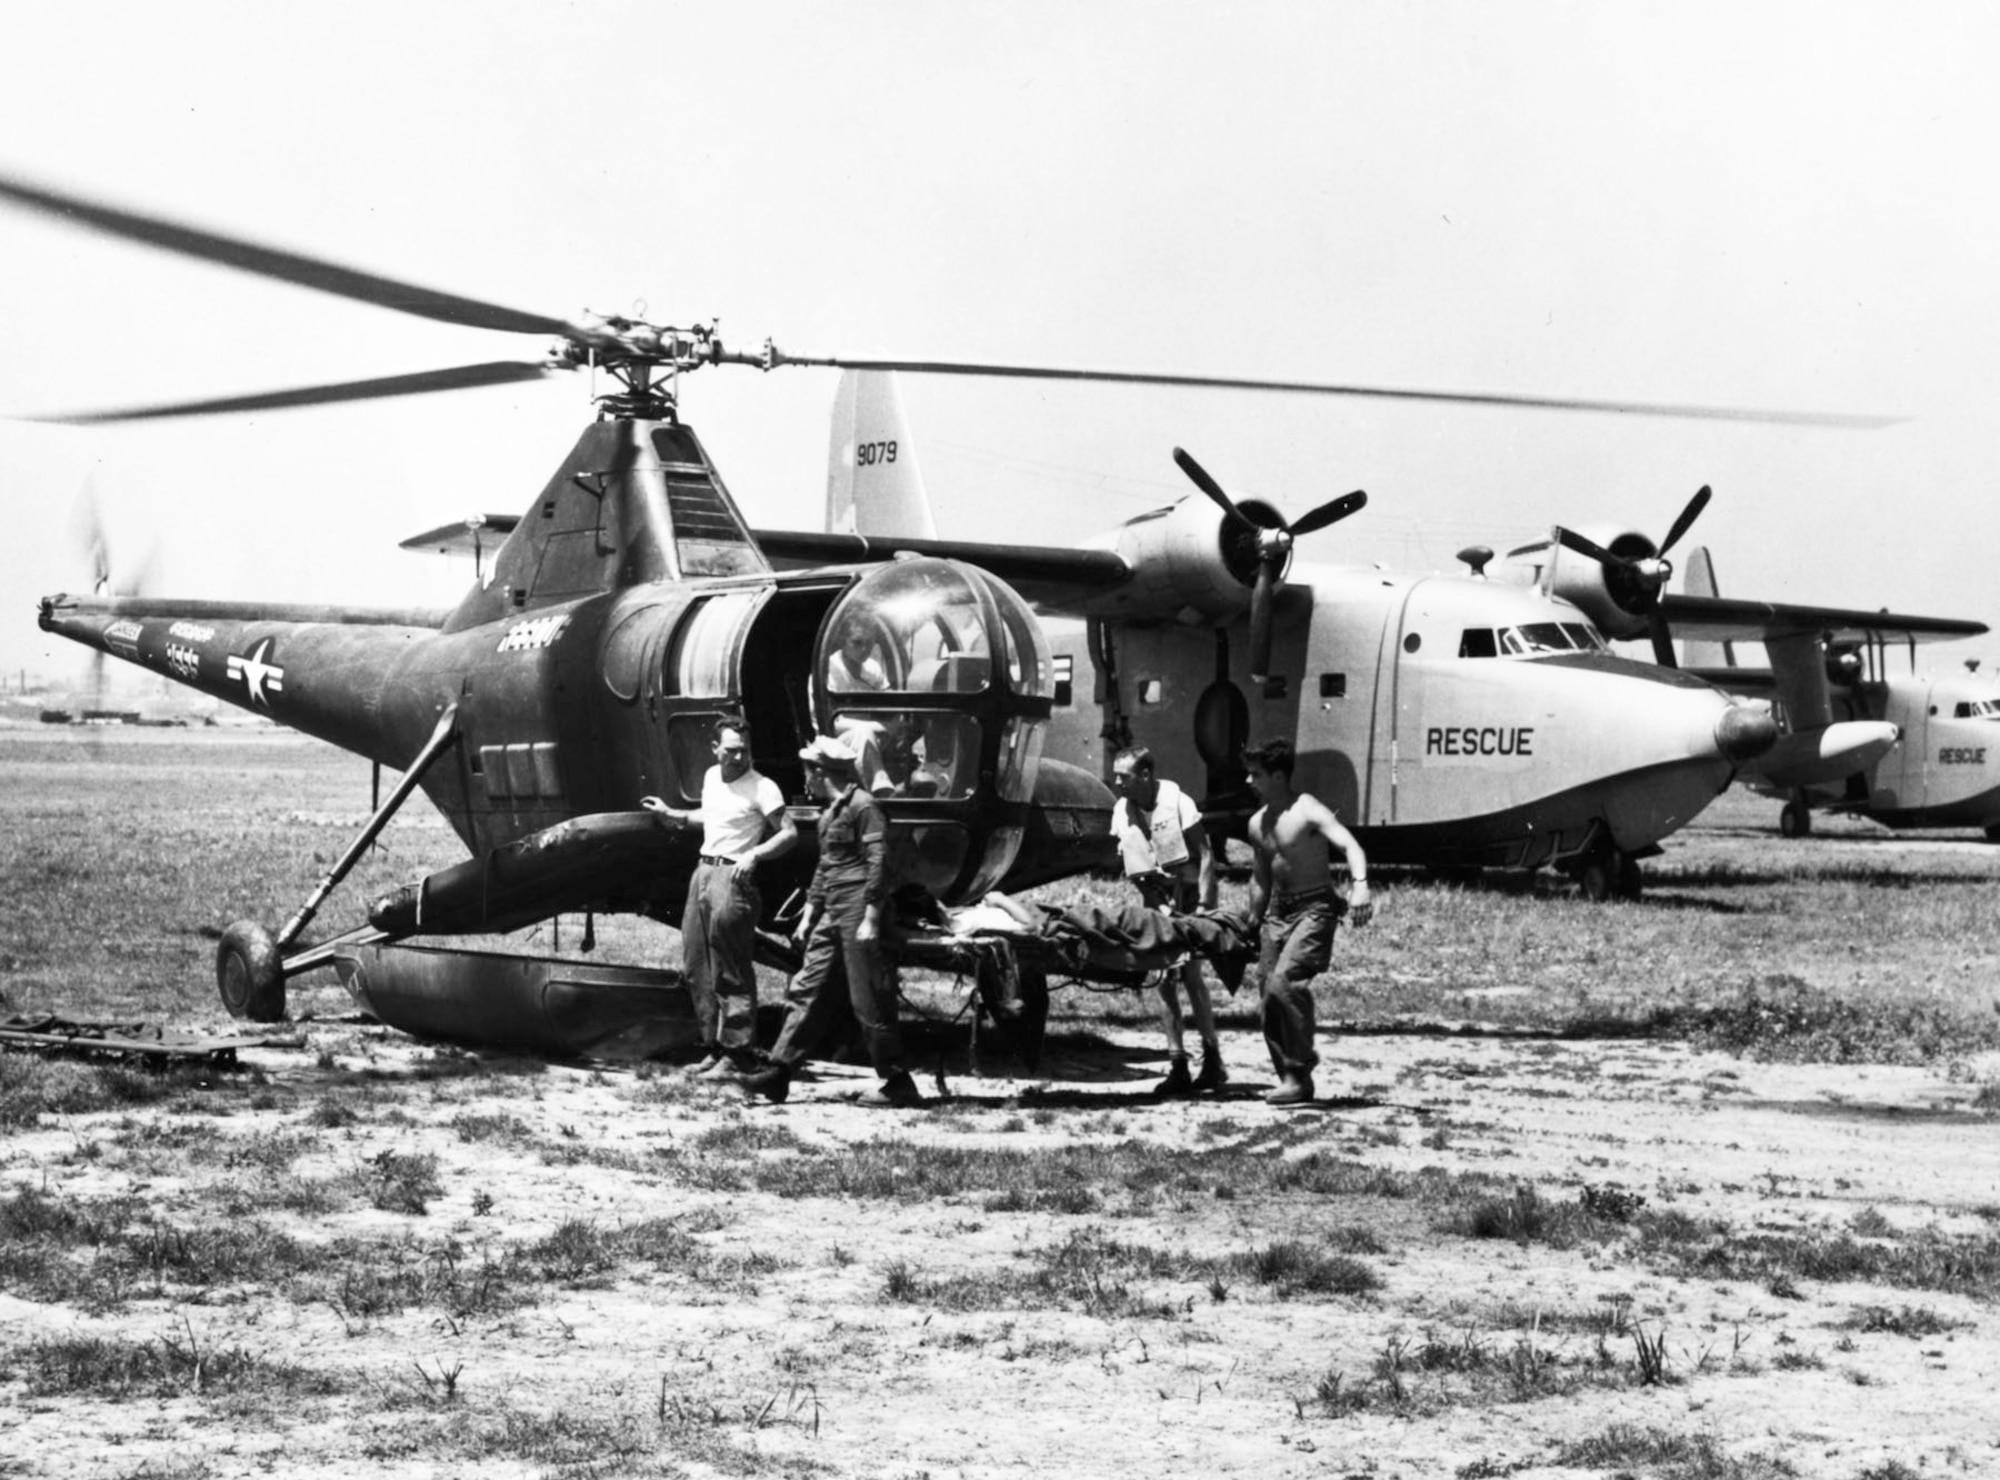 Helicopters and seaplanes worked together. Here, Airmen transfer a patient from the SA-16 Albatross amphibian in the background to an H-5G helicopter. (U.S. Air Force photo)